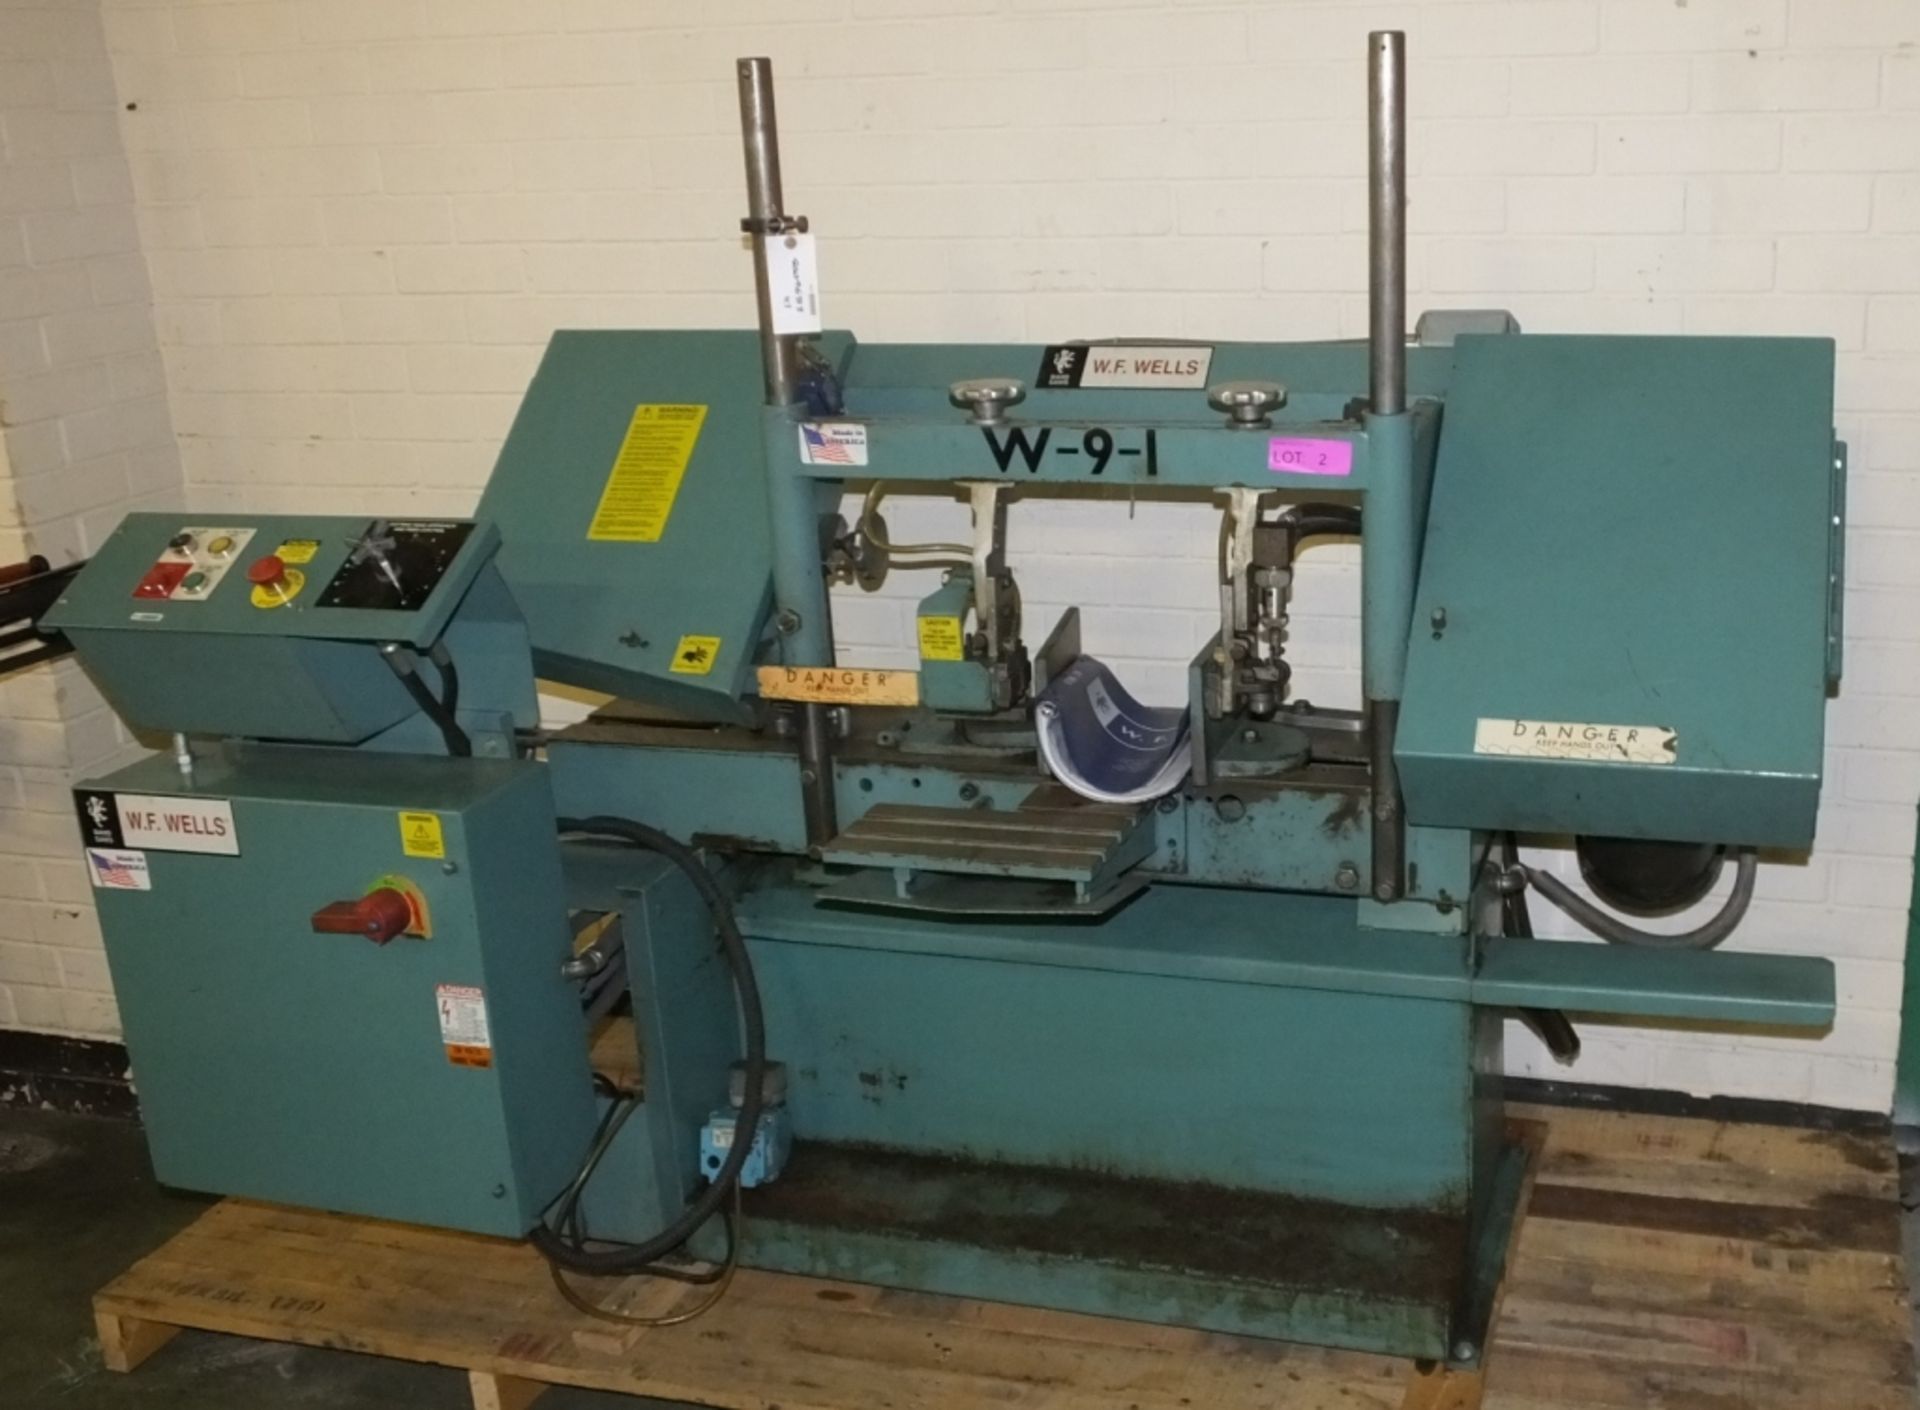 W.F.WELLS W-9-1 Powered Band Saw - £5+VAT lift out charge applied to this lot